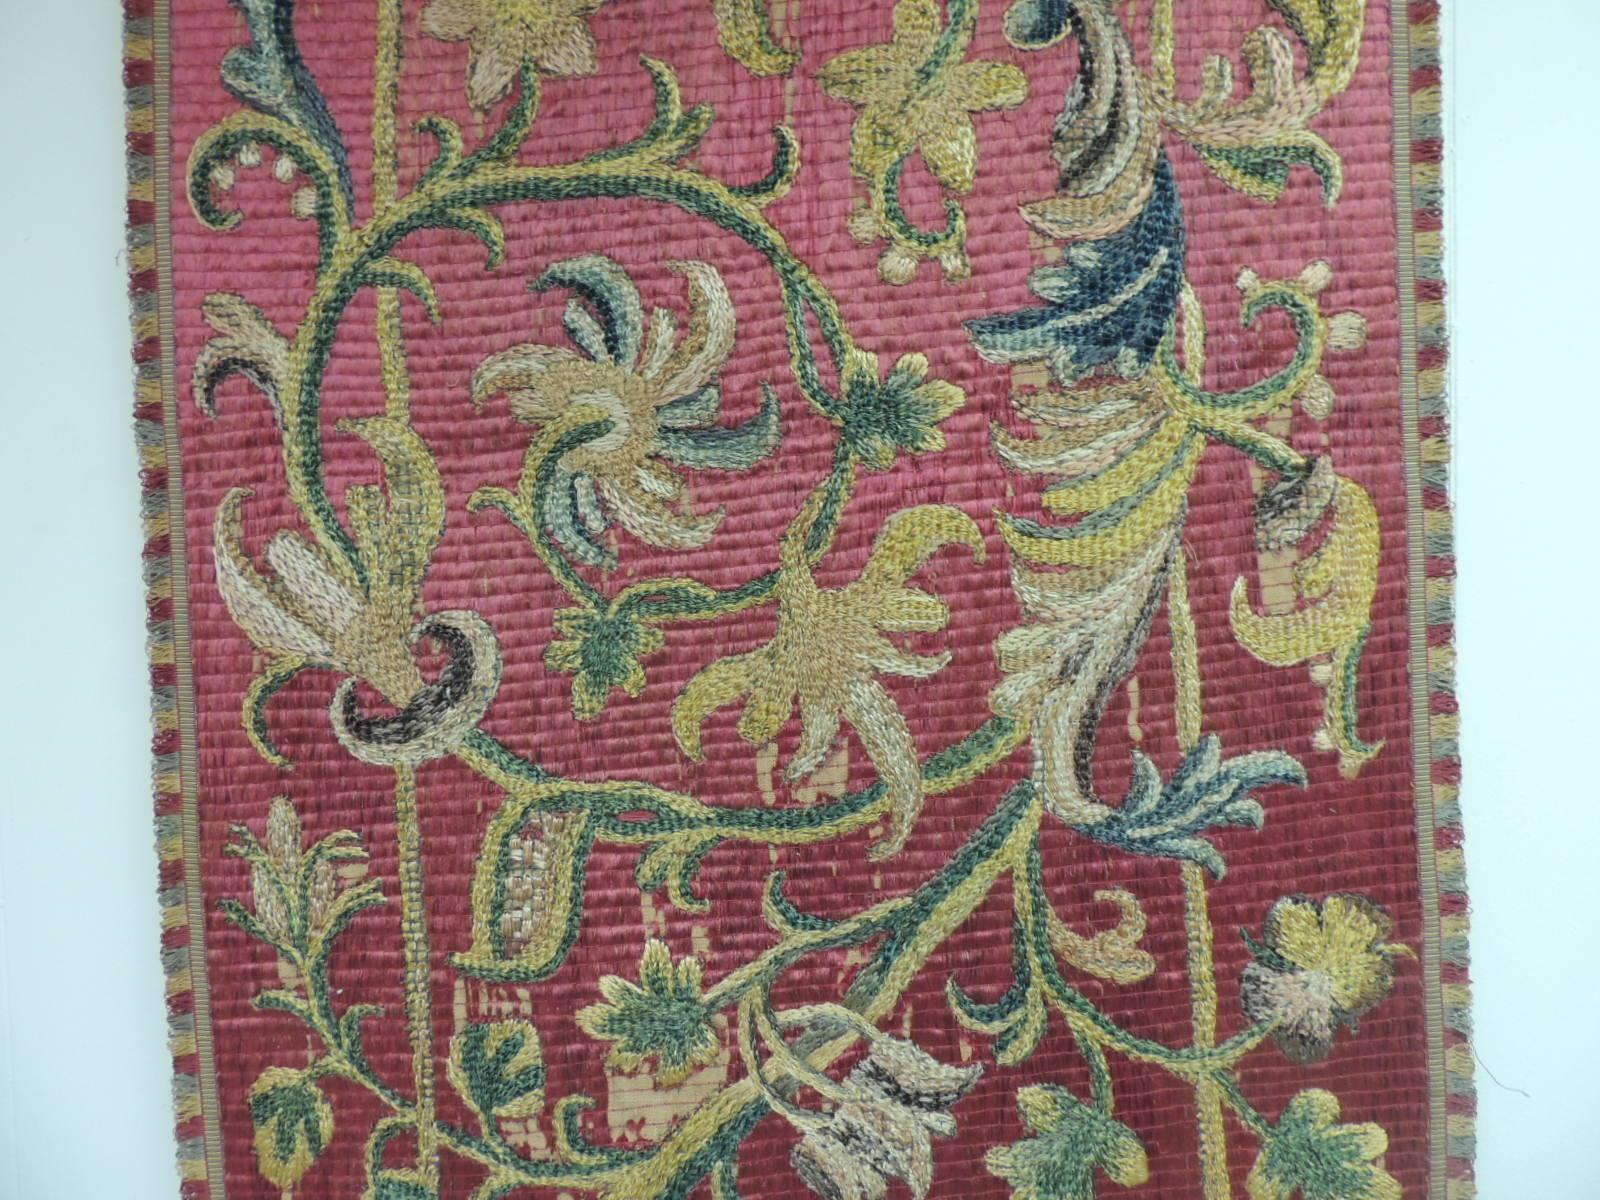 Antique red and green Italian silk floss threads embroidery panel.
Hand embroidered silk panel depicting flowers, vines and fruits.
Backed with red silk and framed with a small multi-color silk trim.
In shades of red, gold, green and